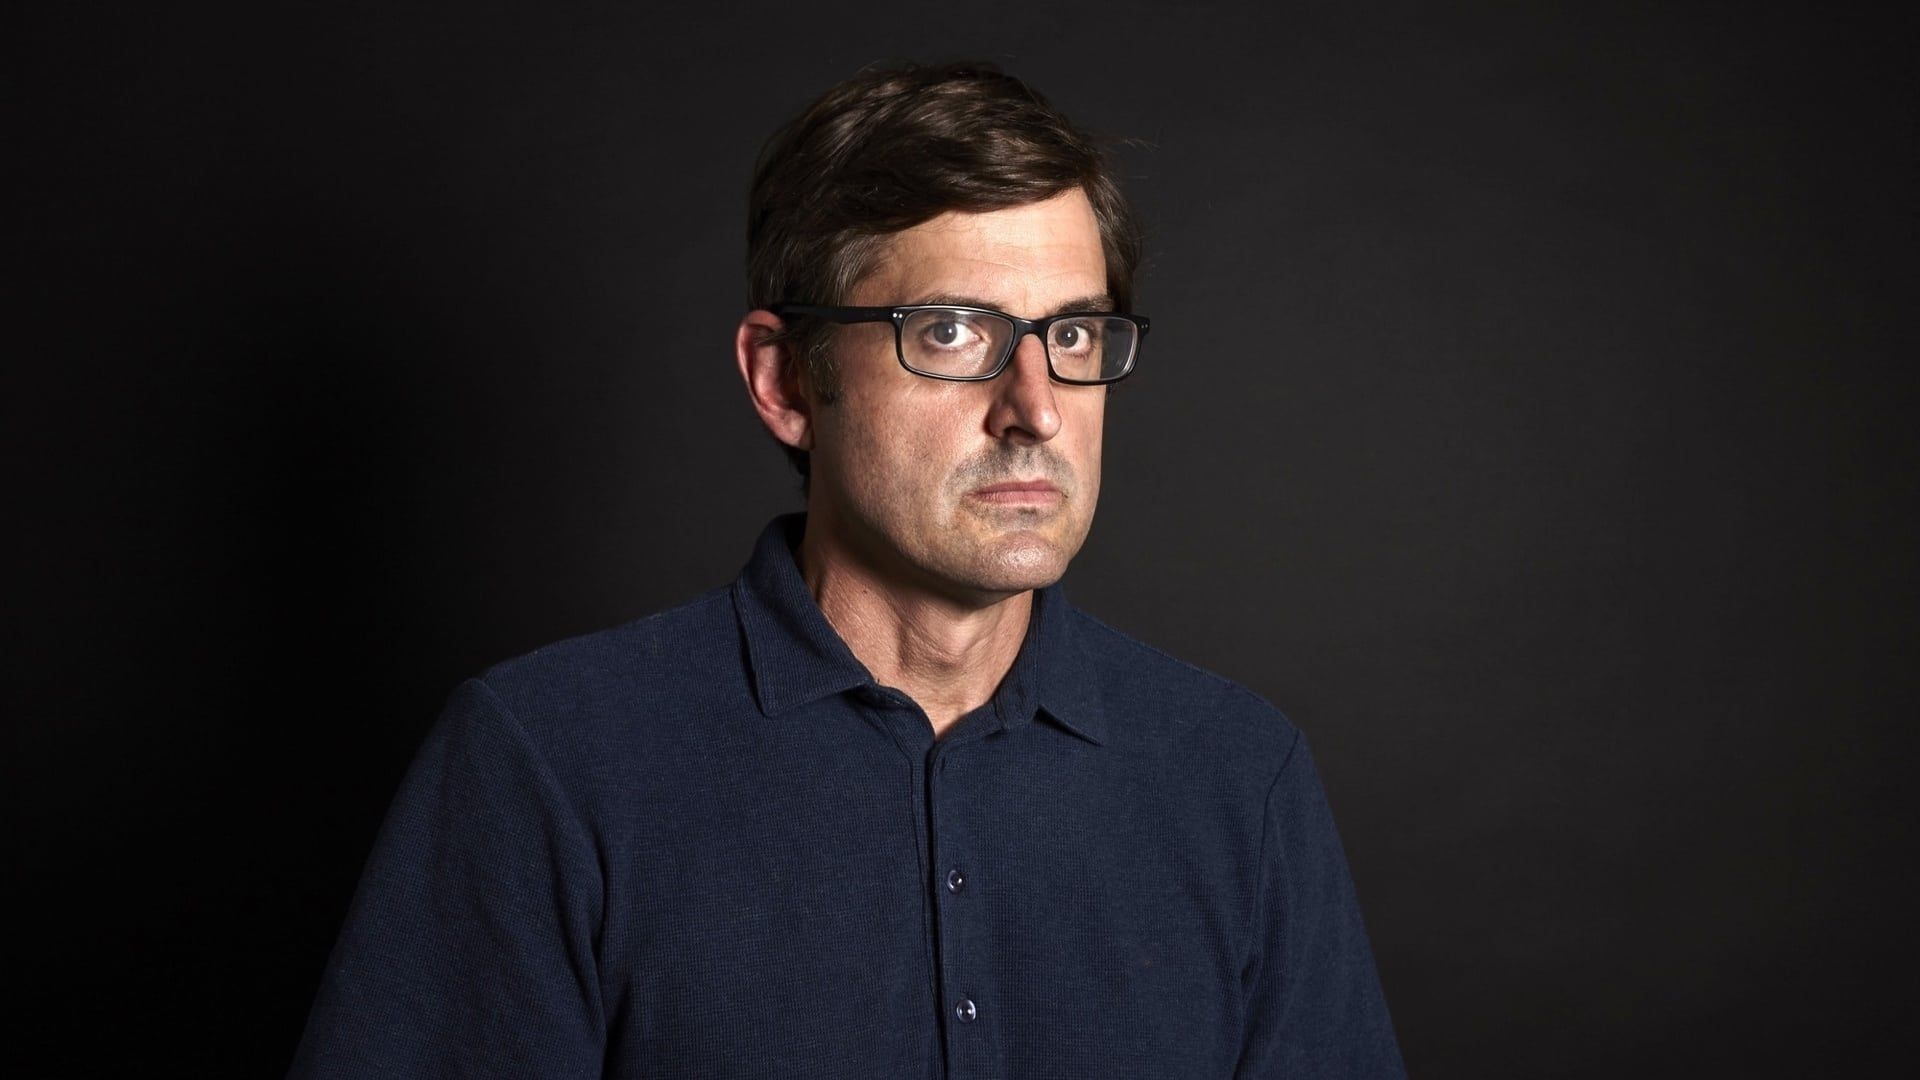 Louis Theroux: Law and Disorder in Johannesburg background